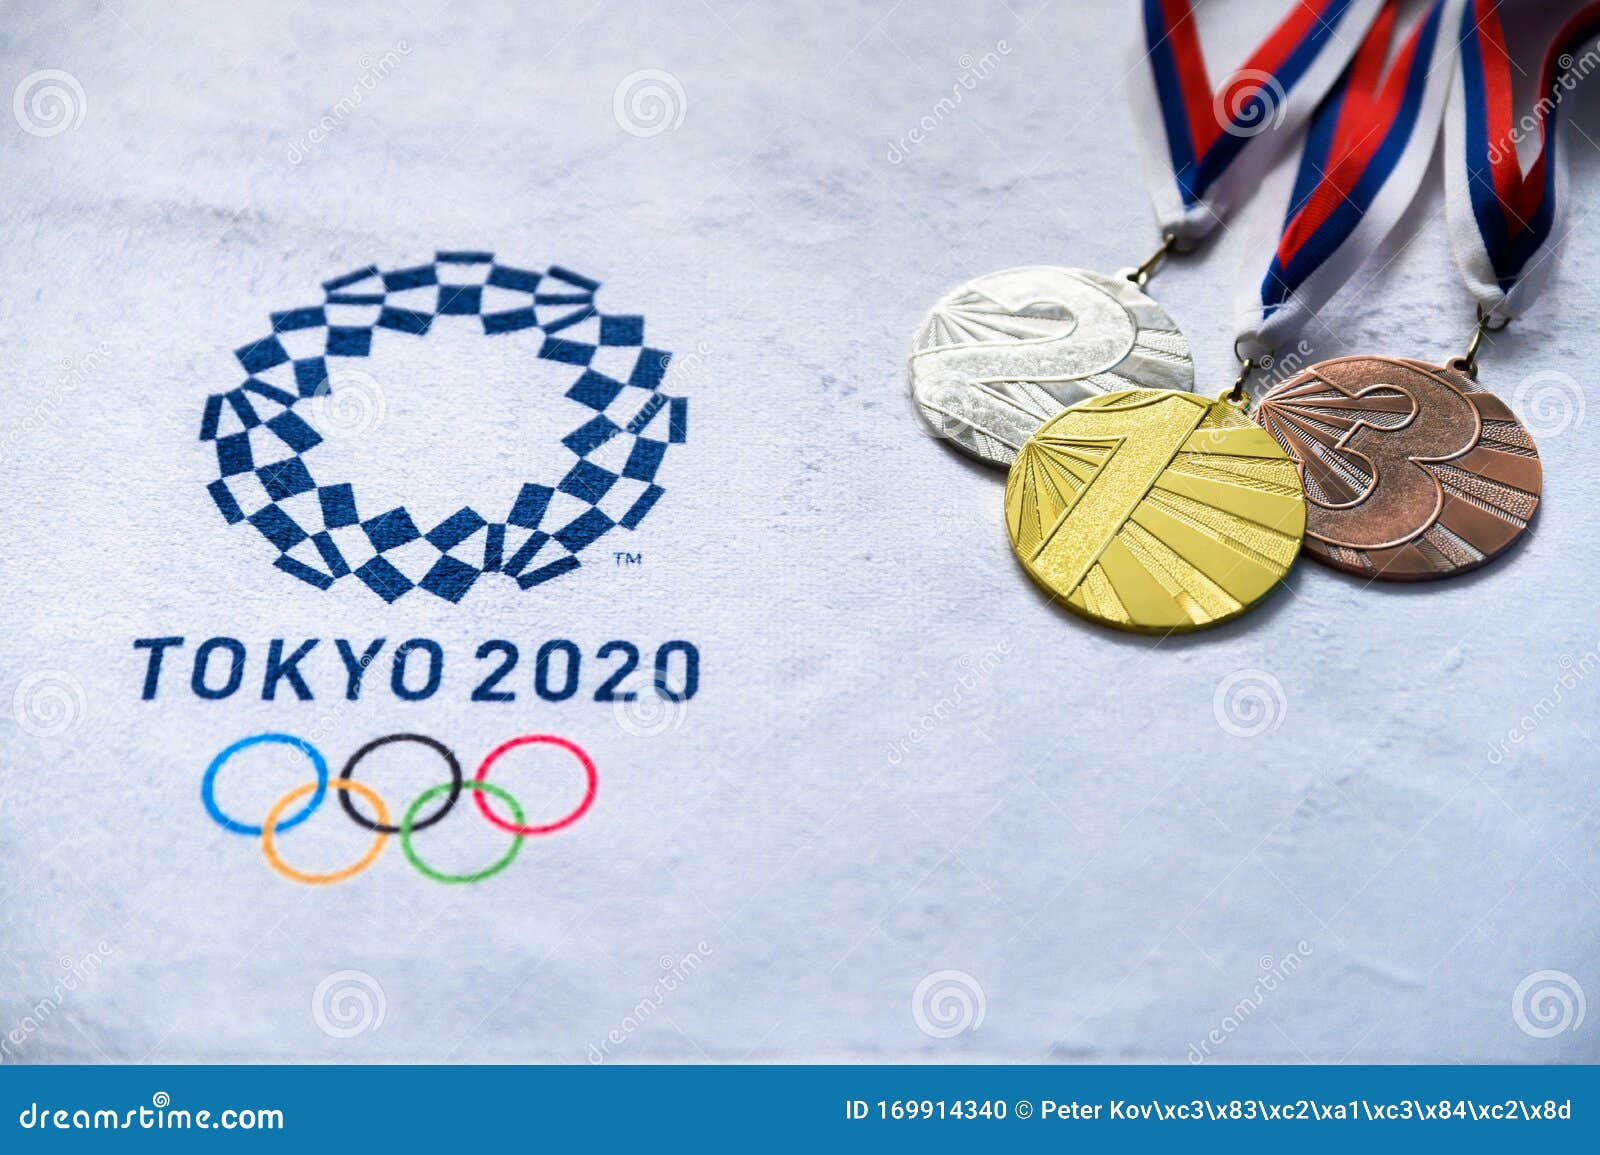 Tokyo olympic 2020 medal tally